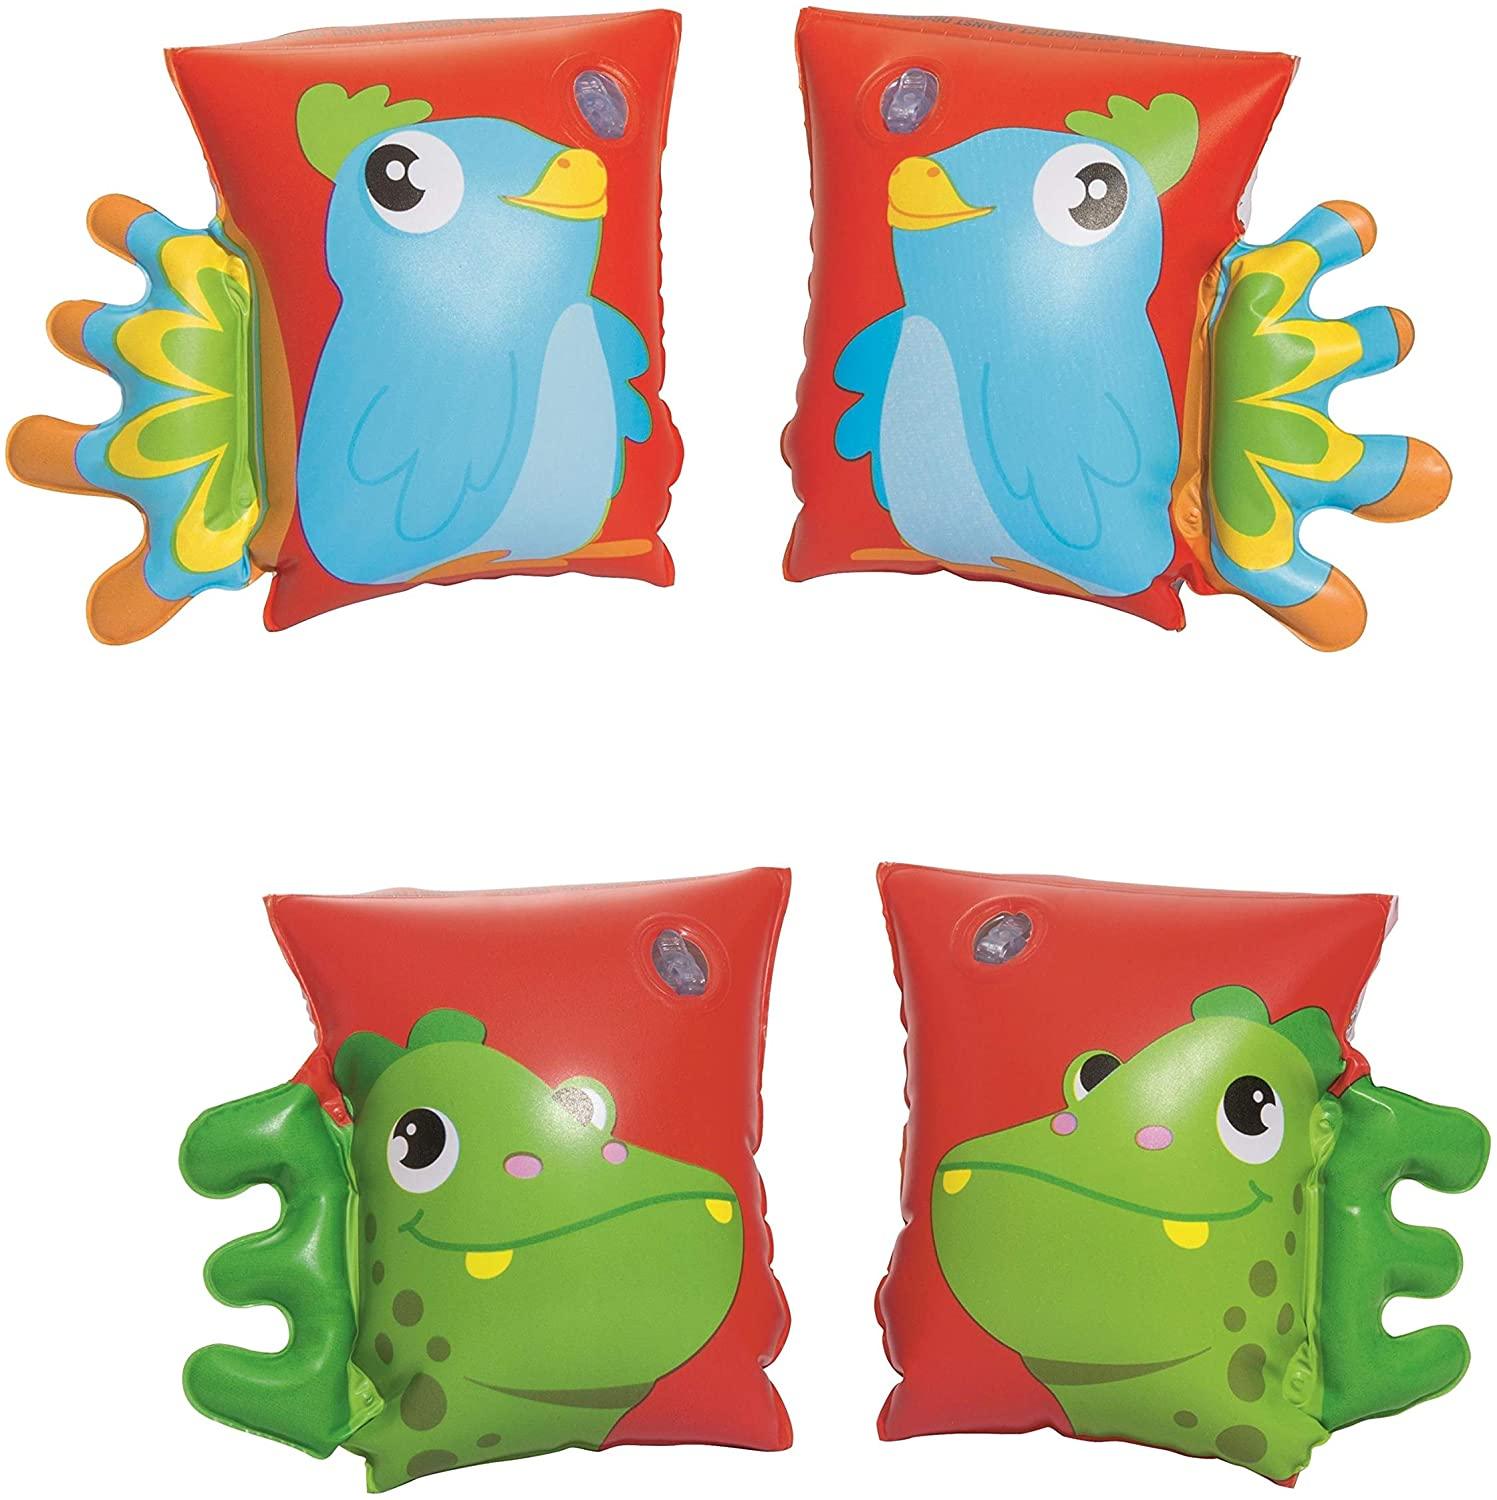 Bestway Armband Dinosaur and Parrot Armbands - Ourkids - Bestway